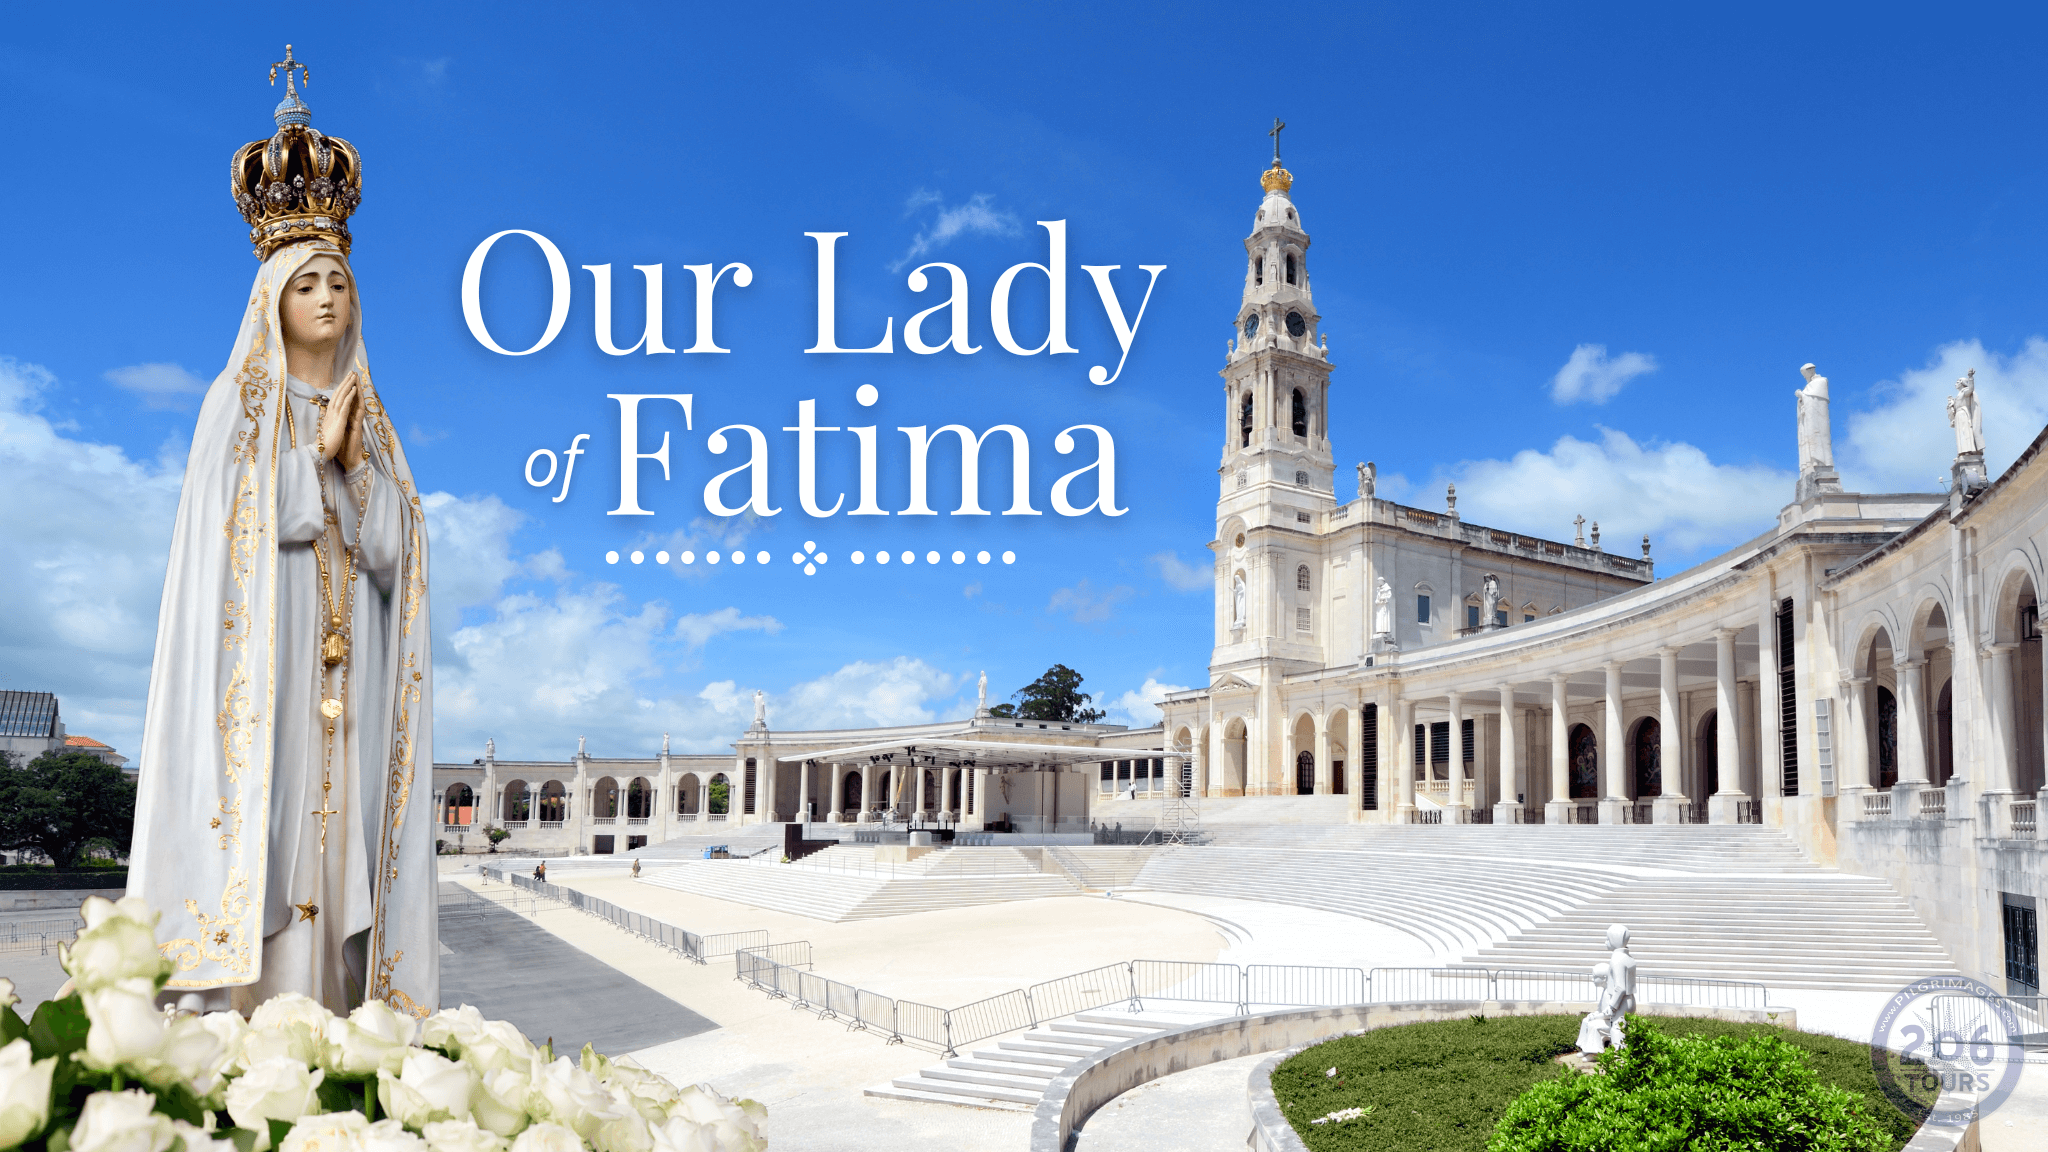 Celebrating Our Lady of Fatima | 206 Tours